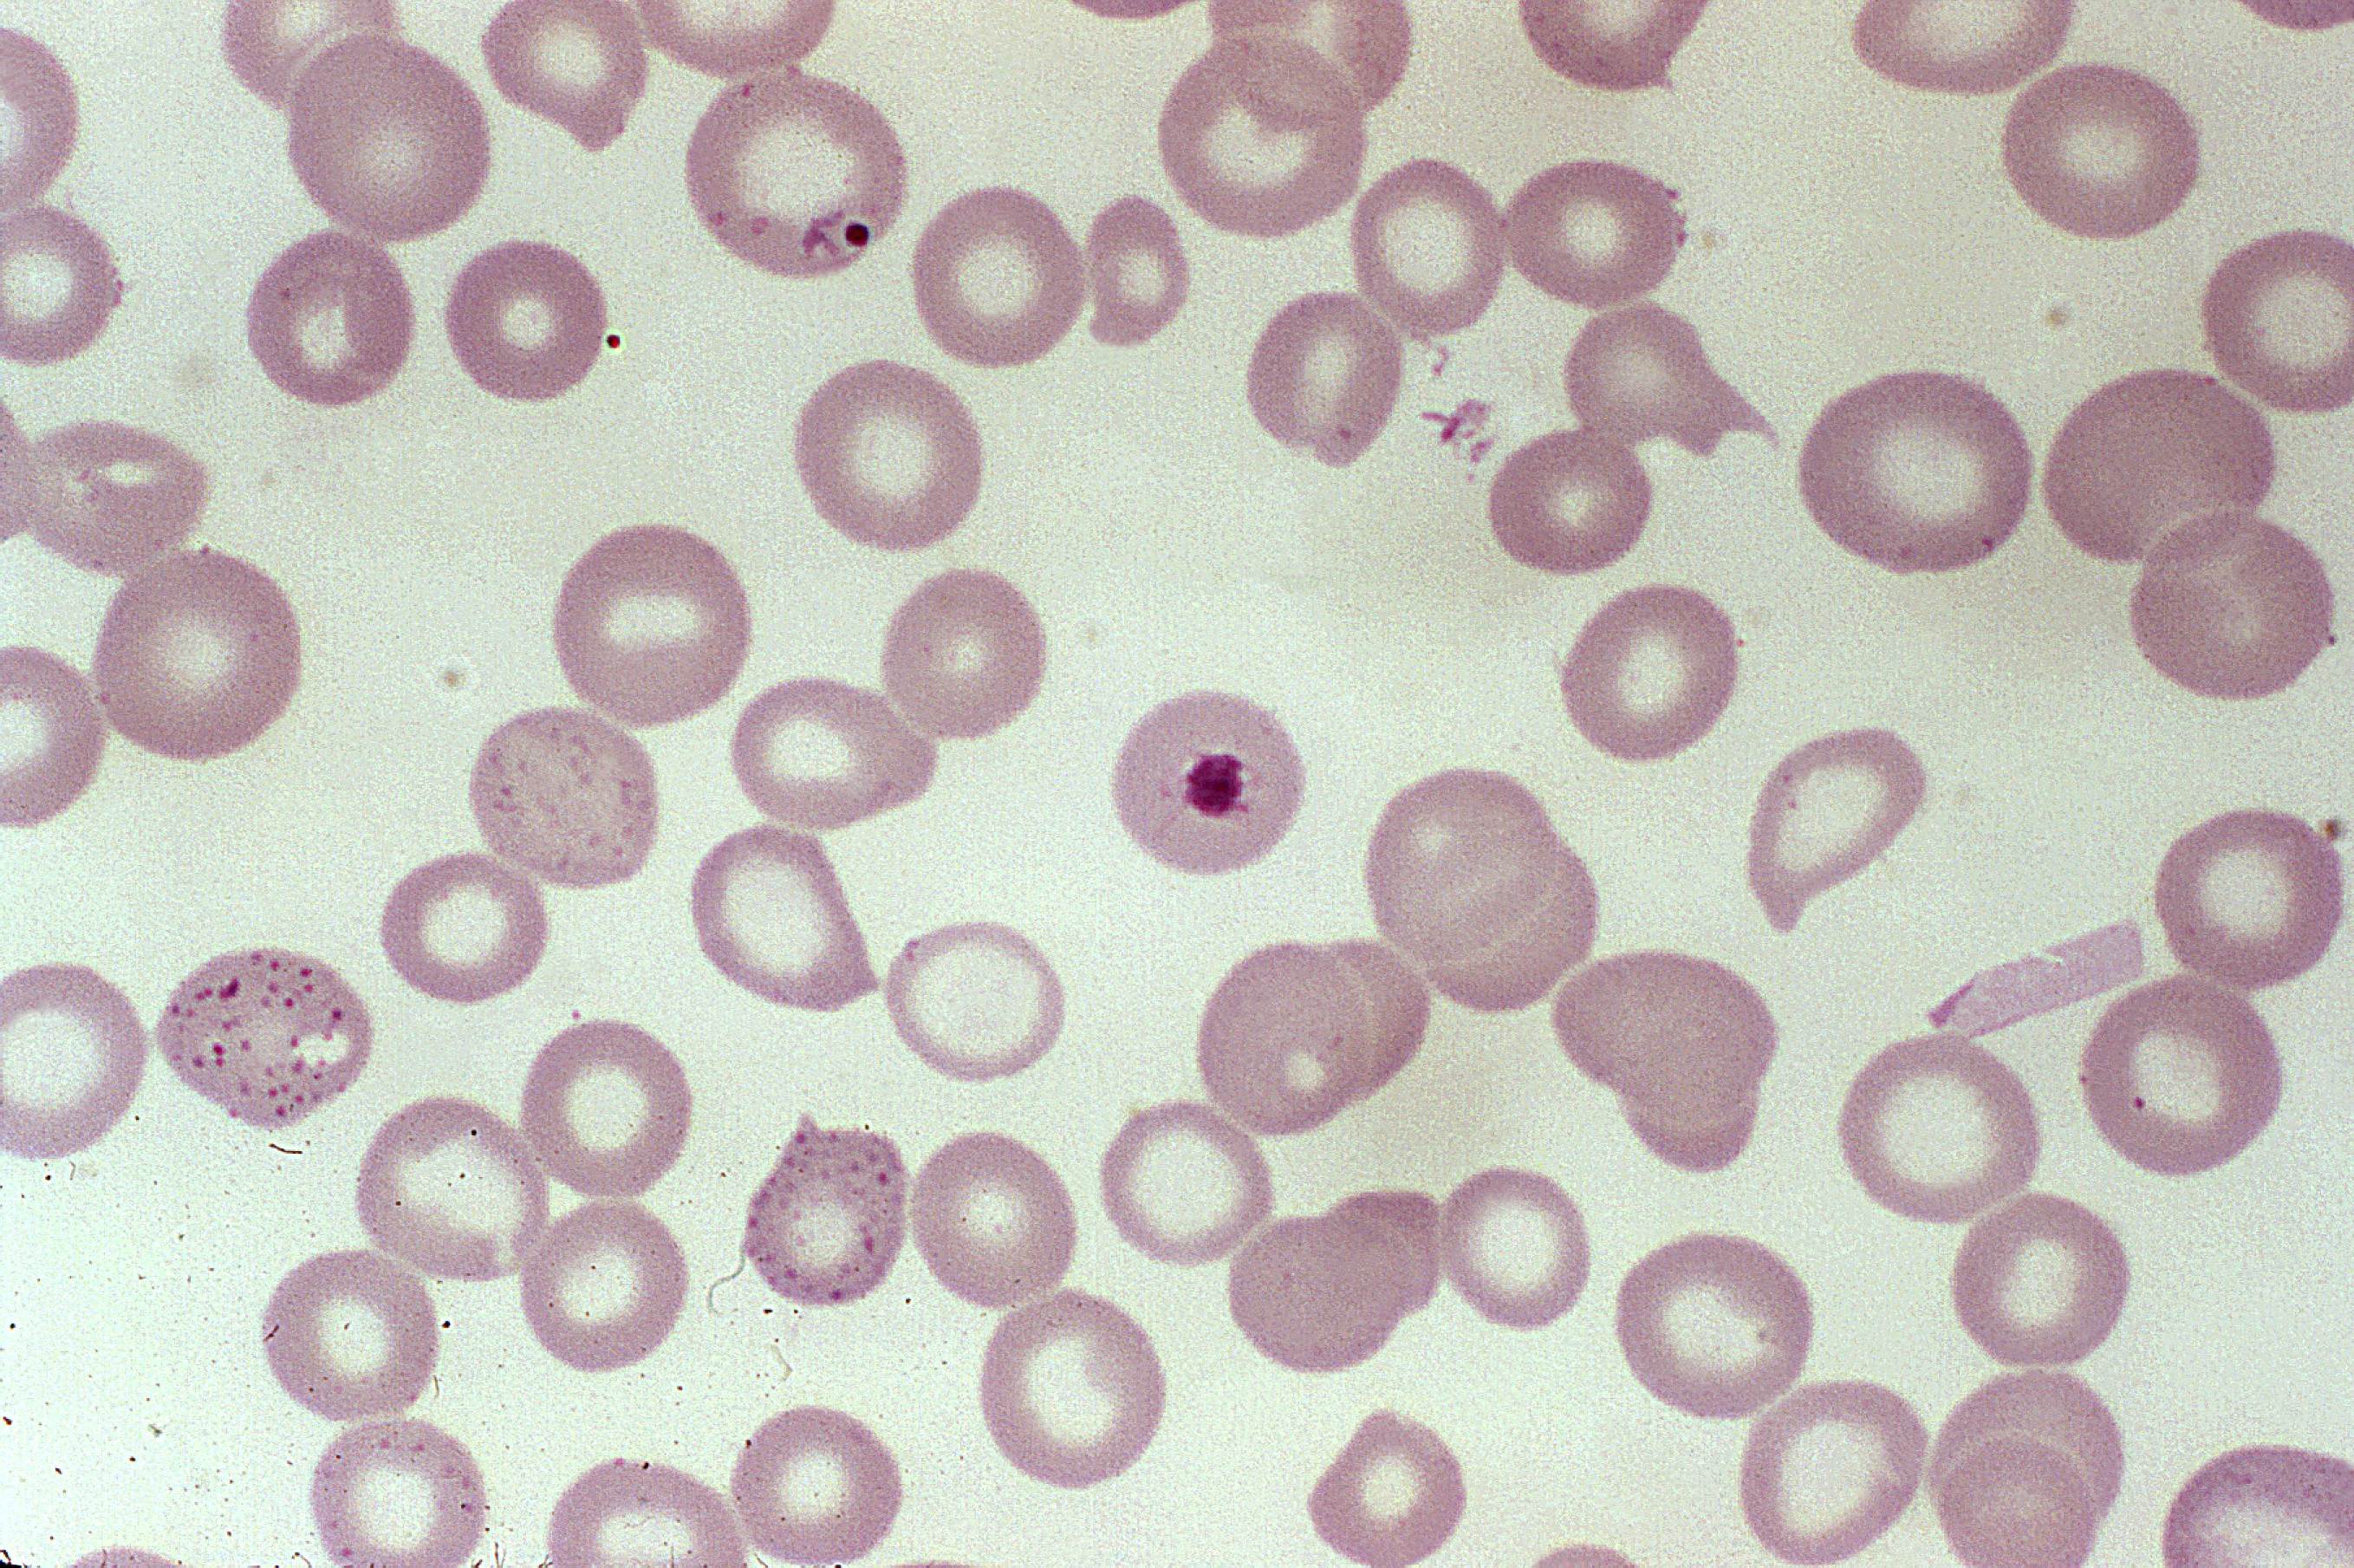 Free picture: blood smear, shows, plasmodium falciparum, parasite, ring, stage ...